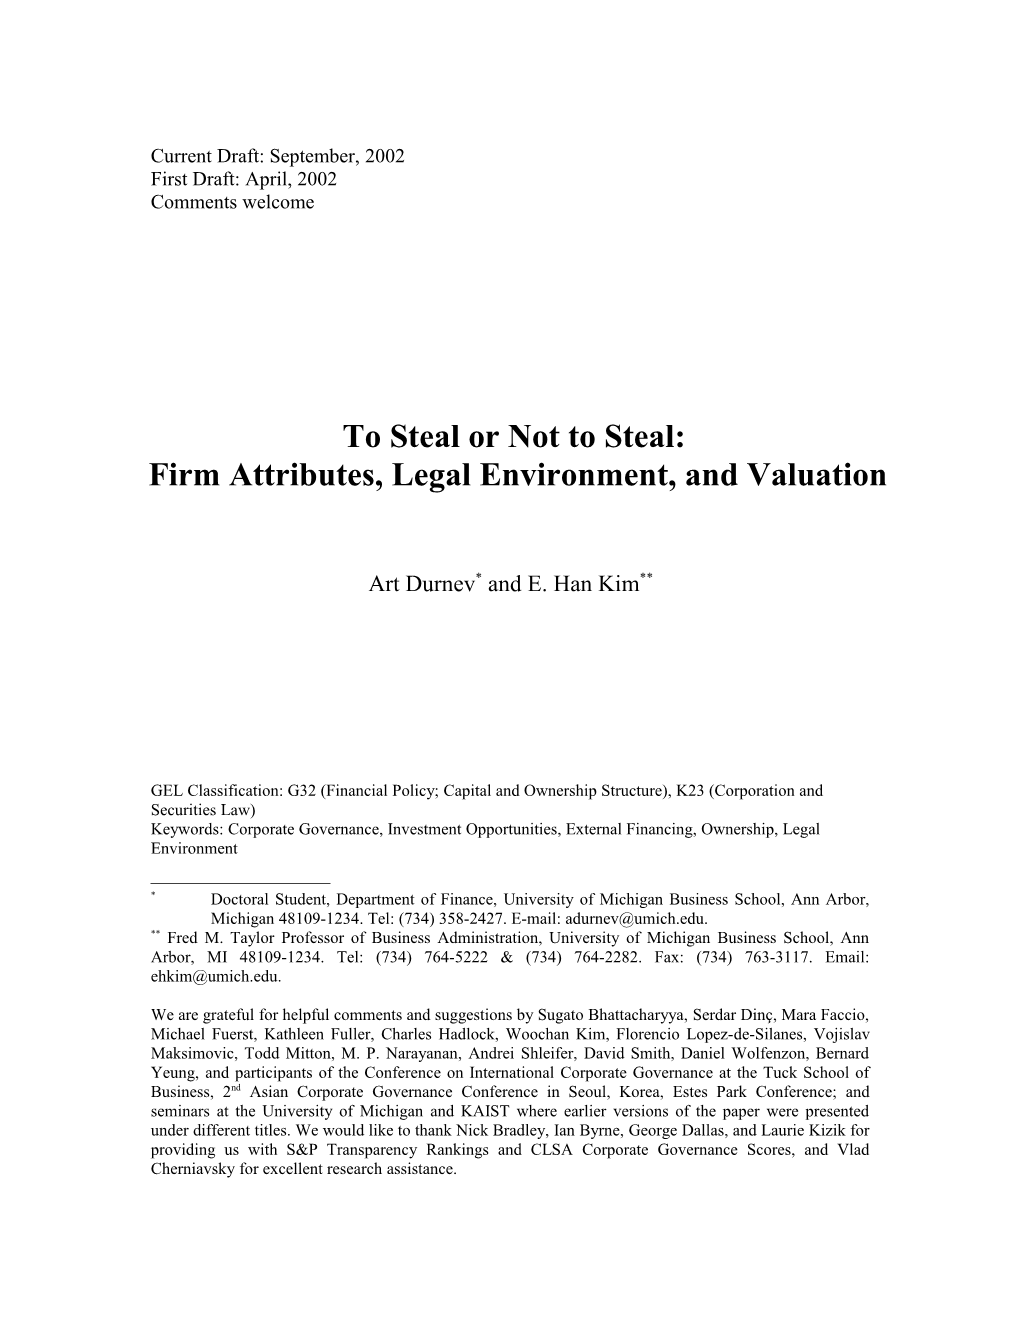 Firm Attributes, Legal Environment, and Valuation